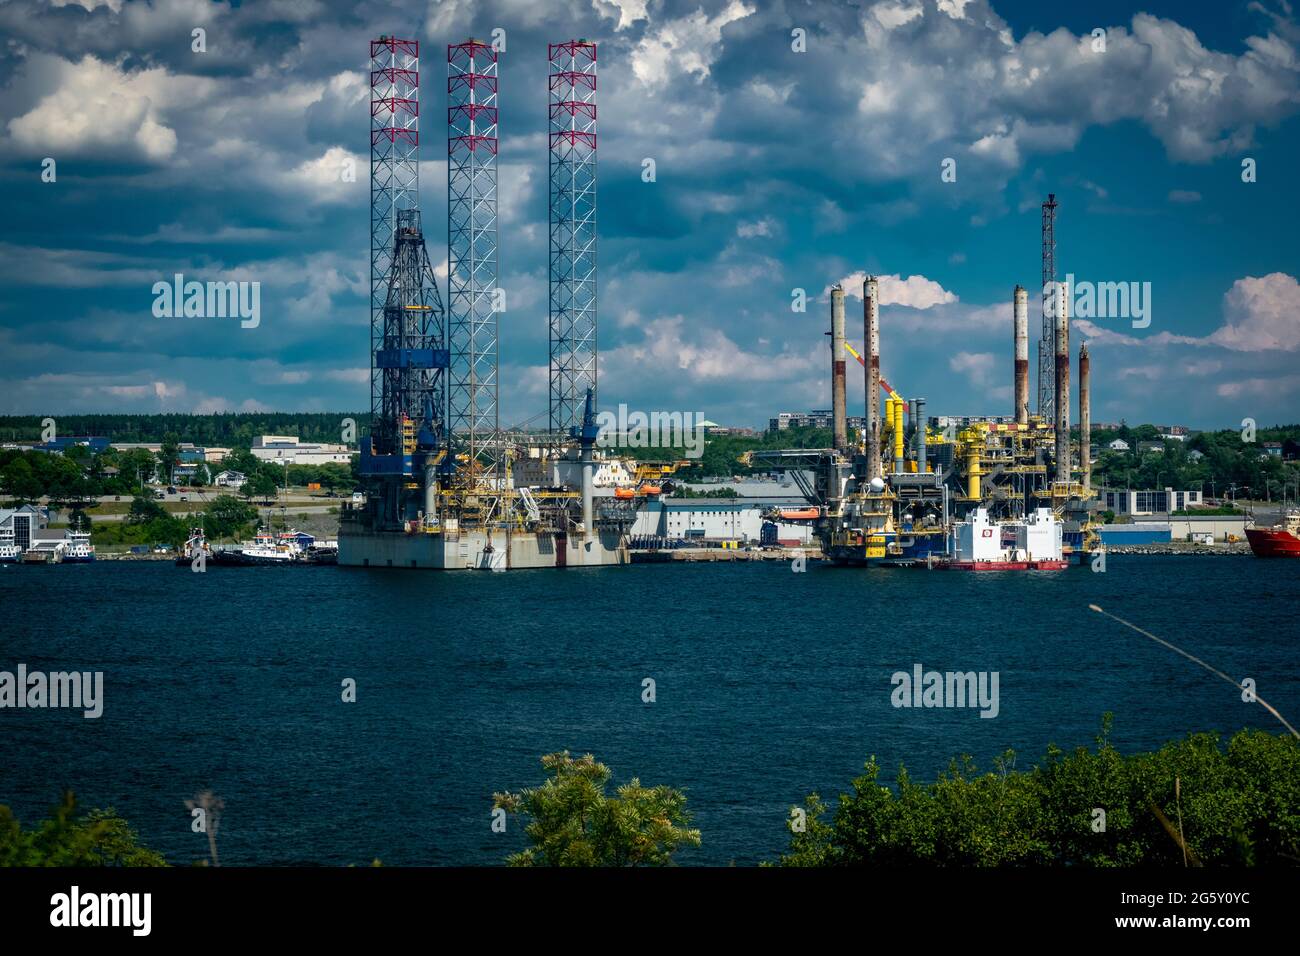 two oil platforms at irving woodside industrial wharf Stock Photo